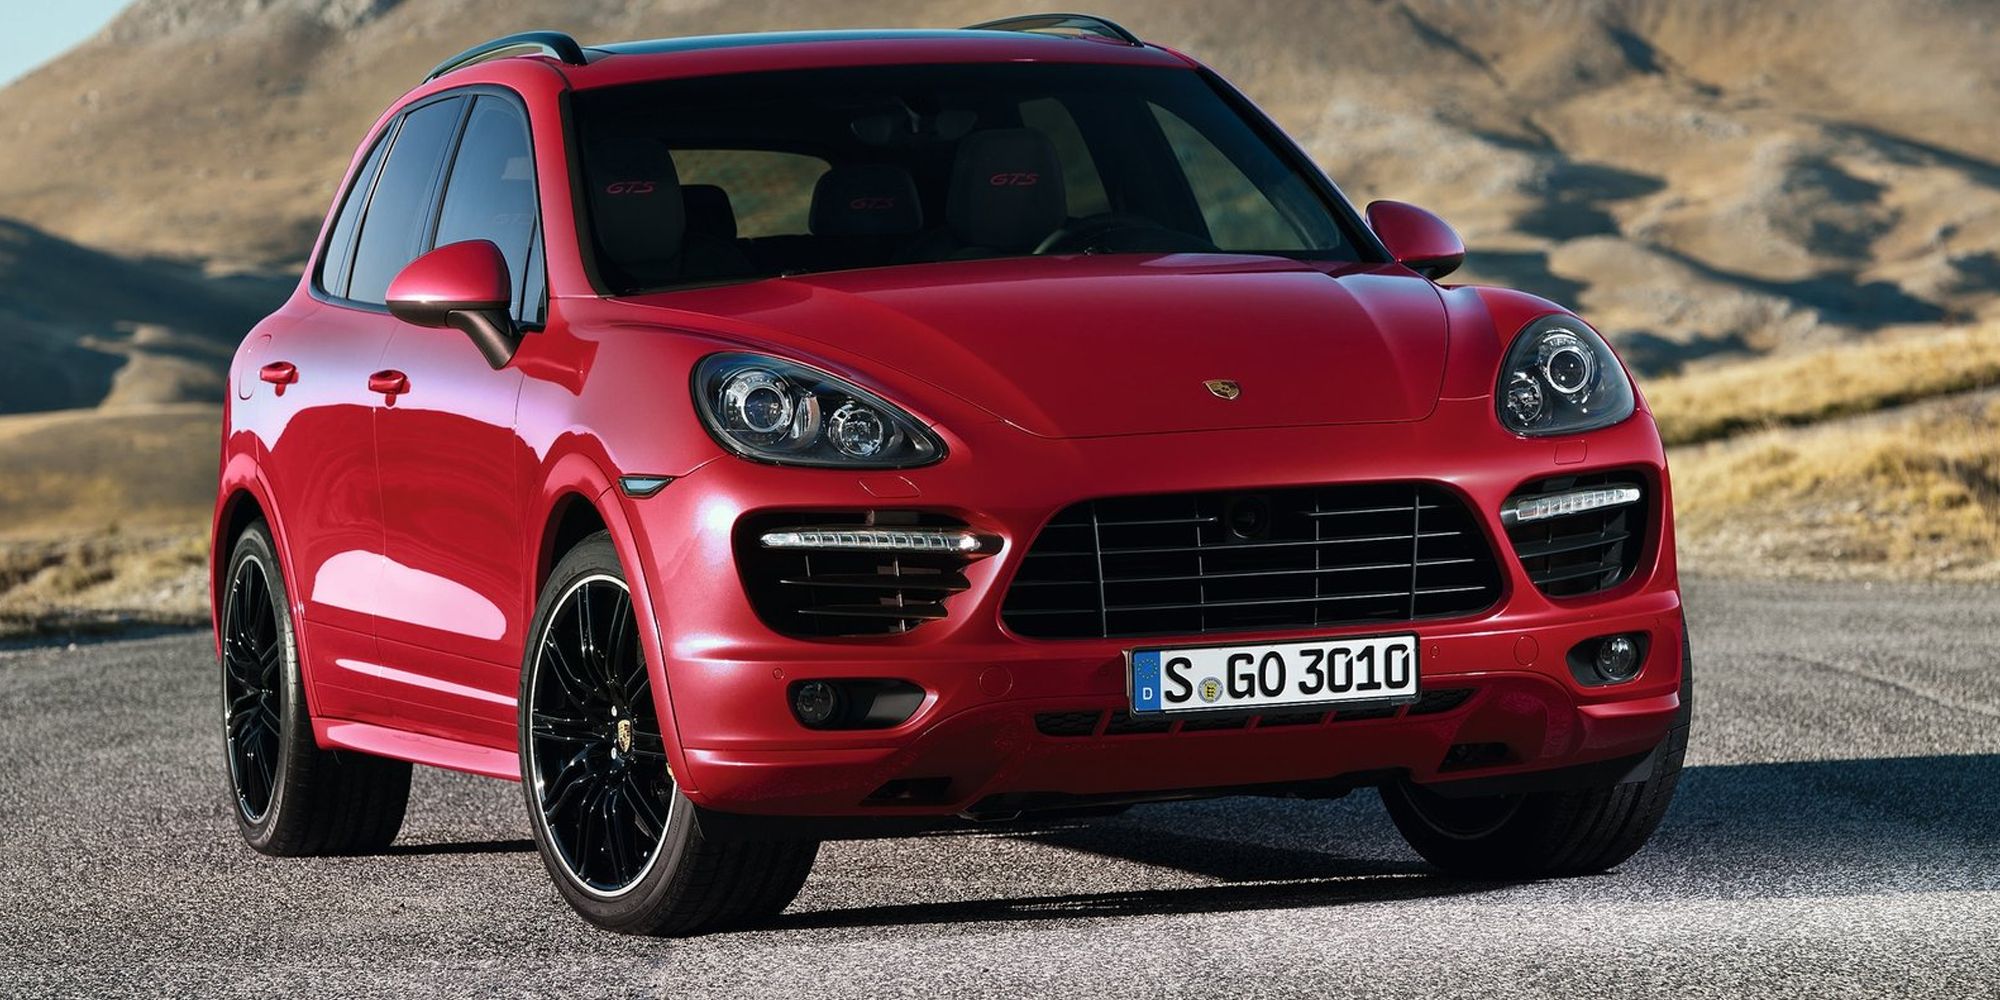 The front of a red Cayenne GTS